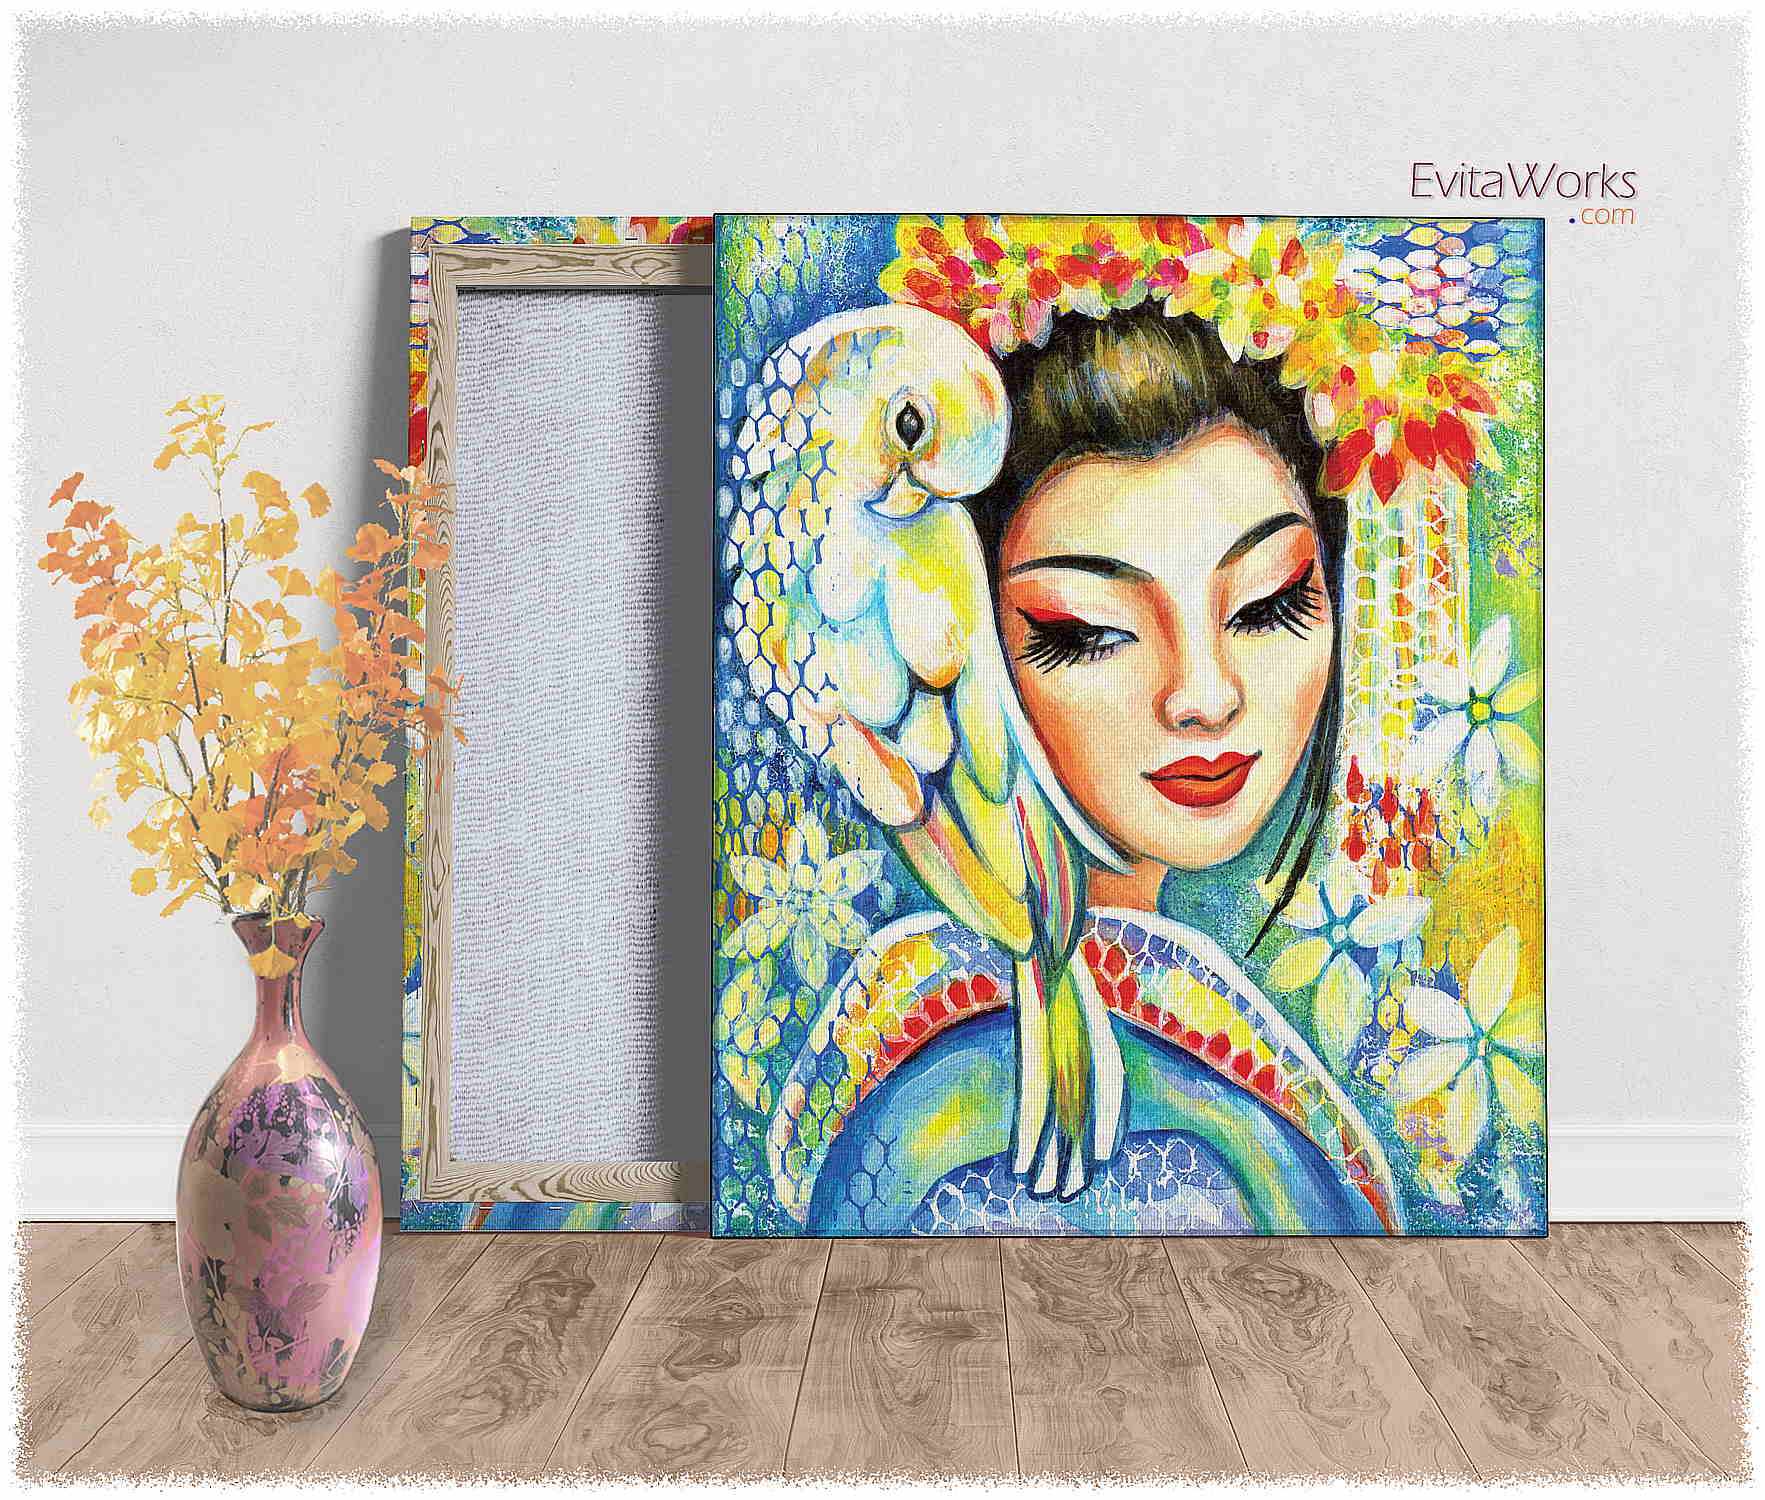 Hit to learn about "Harmony, beautiful Asian art" on canvases